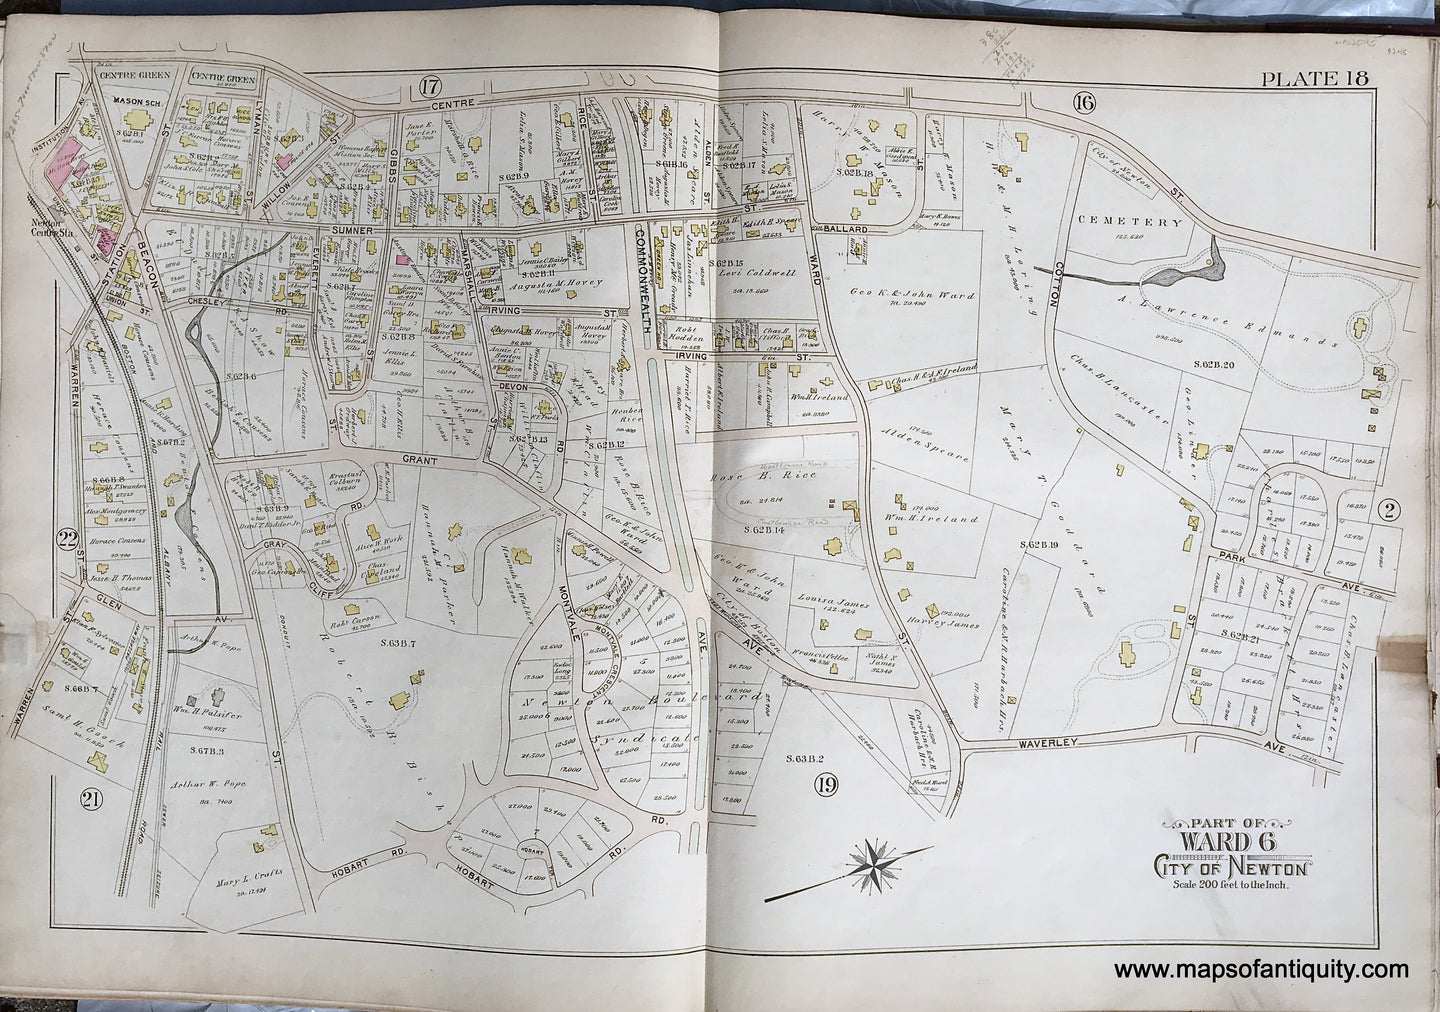 Antique-Printed-Color-Map-Part-of-Ward-6-City-of-Newton-Massachusetts-plate-18-1895-Bromley-Massachusetts-1800s-19th-century-Maps-of-Antiquity